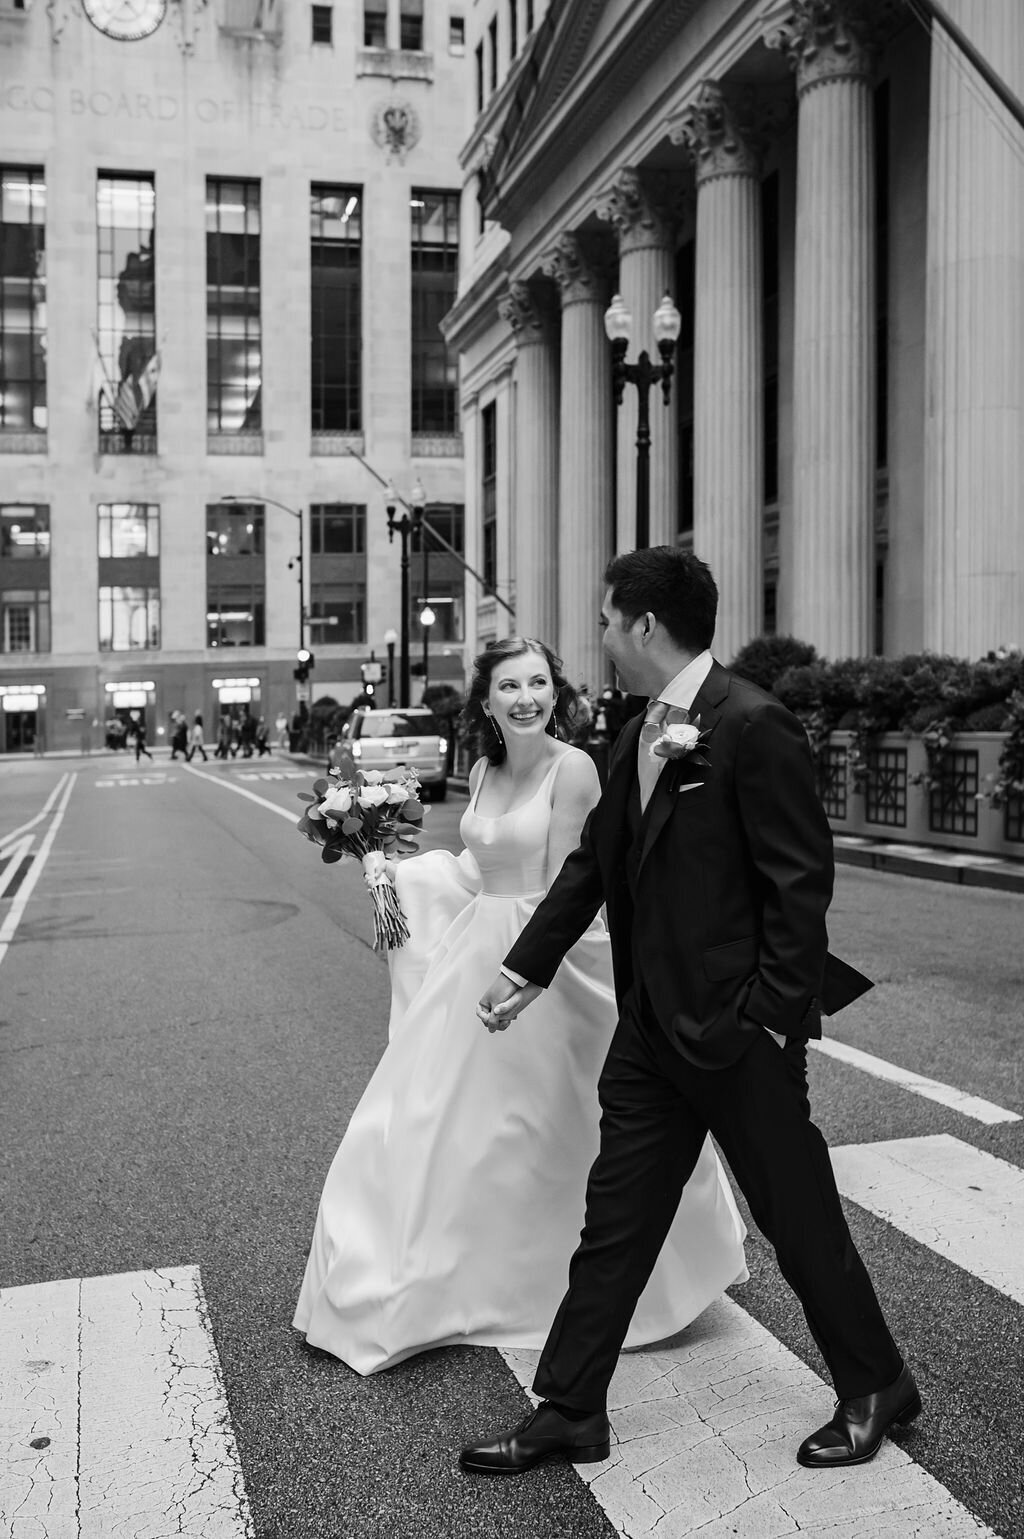 Bride and groom walk across street in Chicago, IL